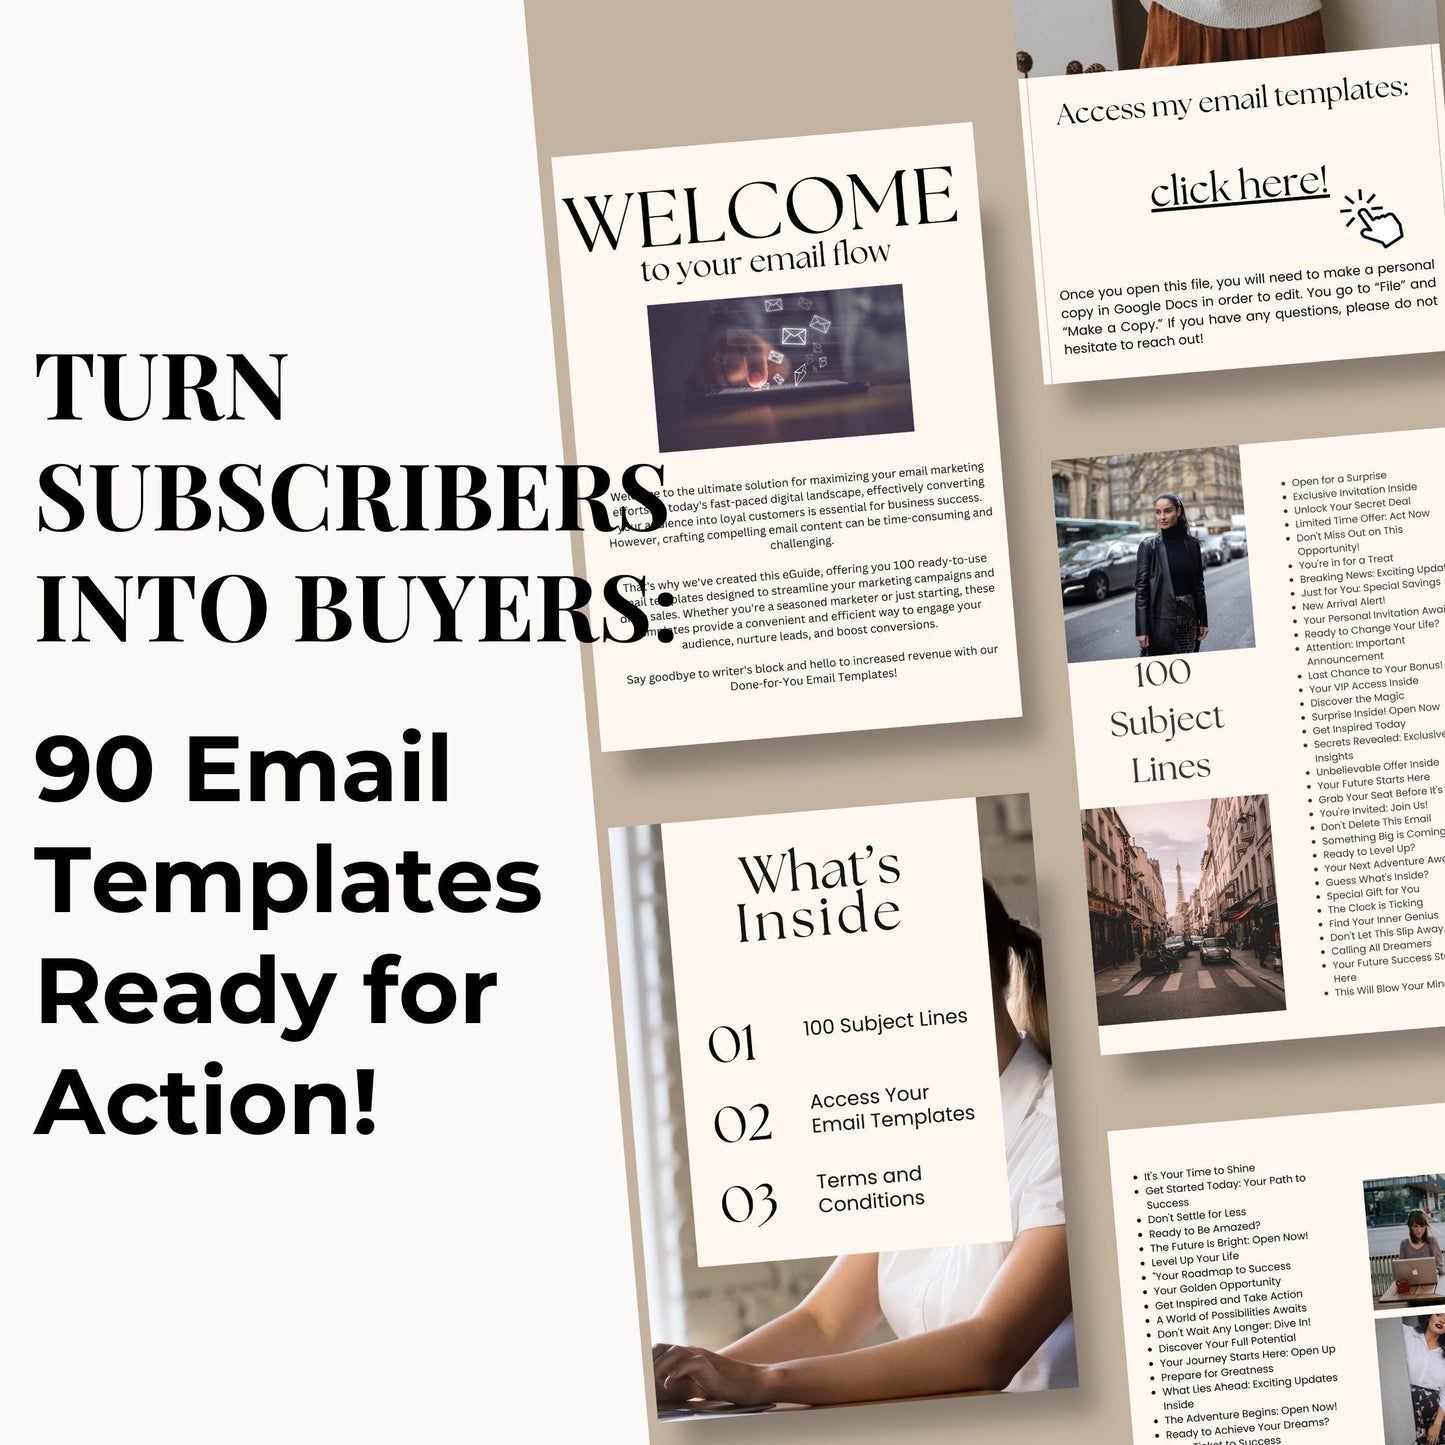 Email Marketing Guide + Email Templates with Resell Rights- DFY Digital Product